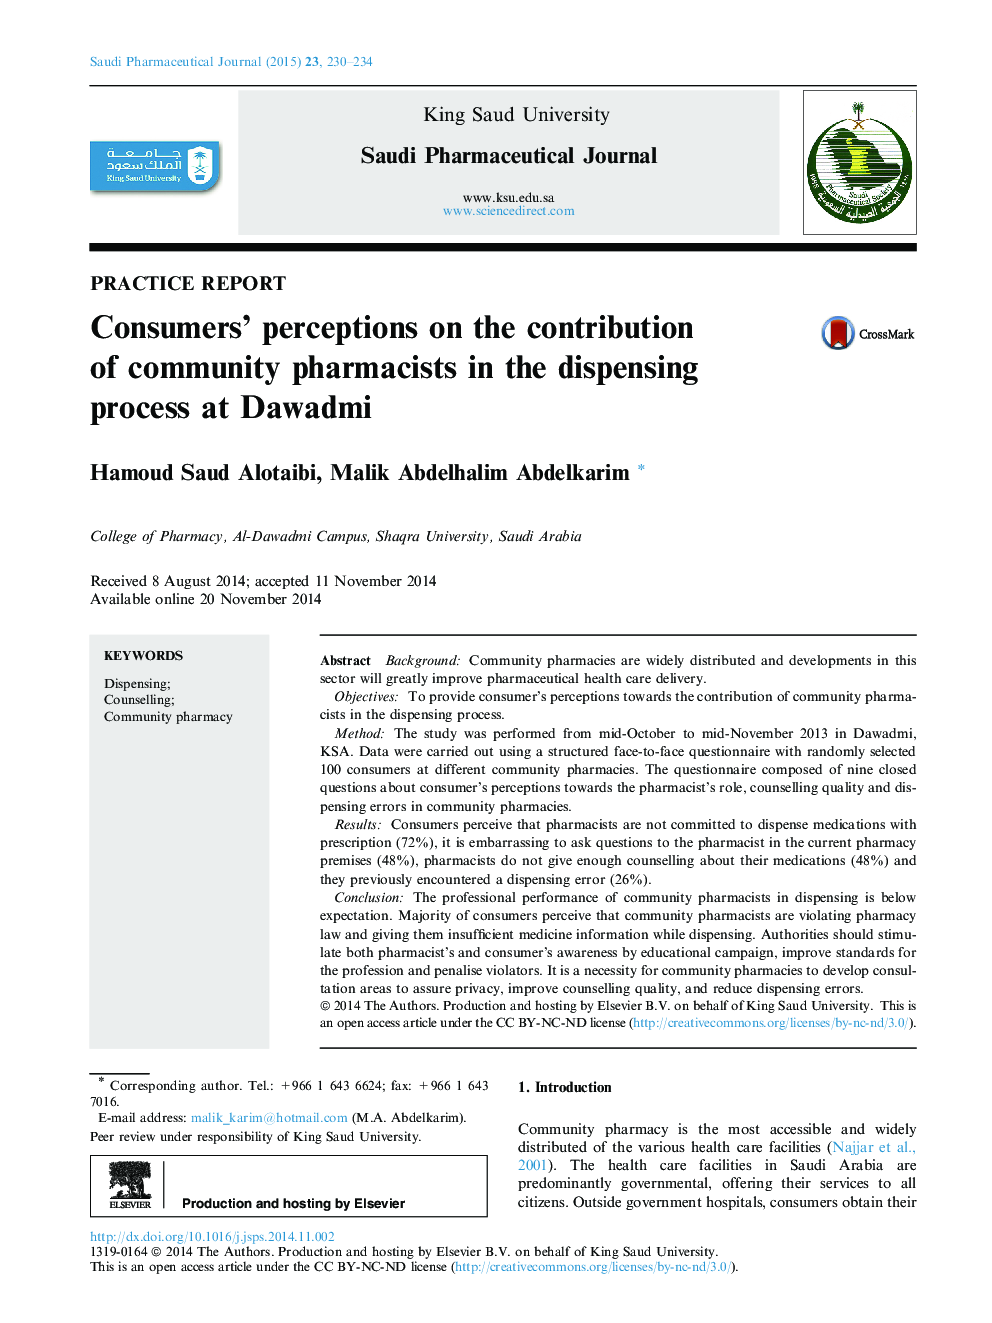 Consumers’ perceptions on the contribution of community pharmacists in the dispensing process at Dawadmi 